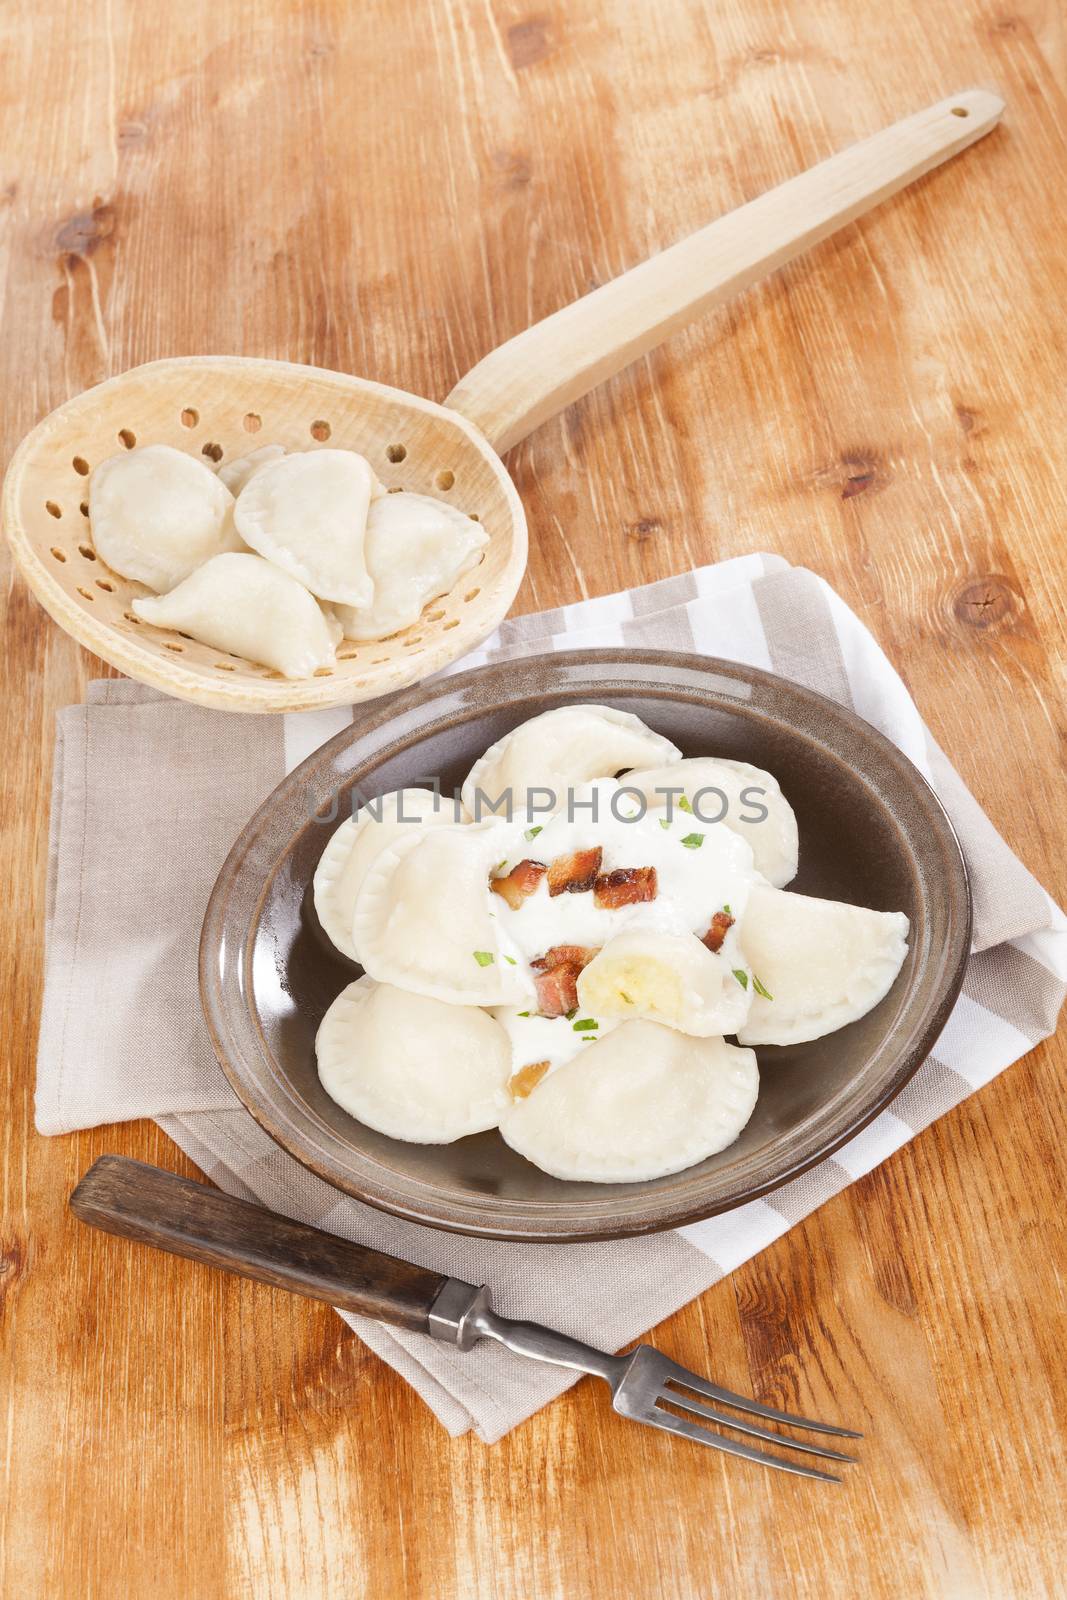 Bryndzove pirohy on wooden background with wooden scoop and fork. Vintage rustic style, traditional slovak eating. 